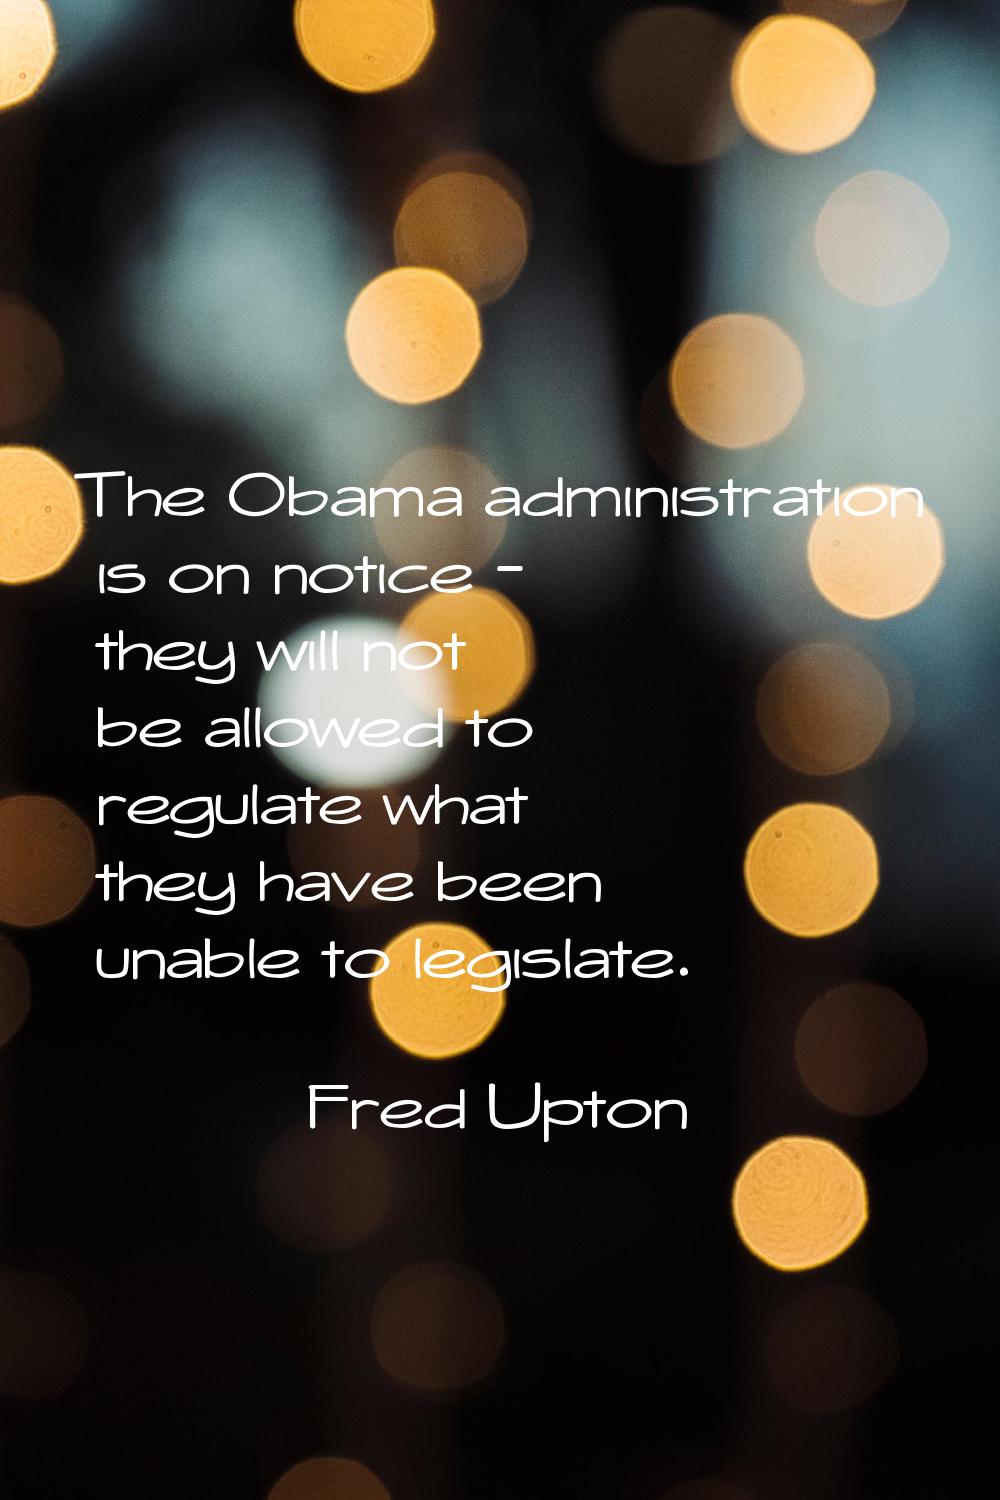 The Obama administration is on notice - they will not be allowed to regulate what they have been un